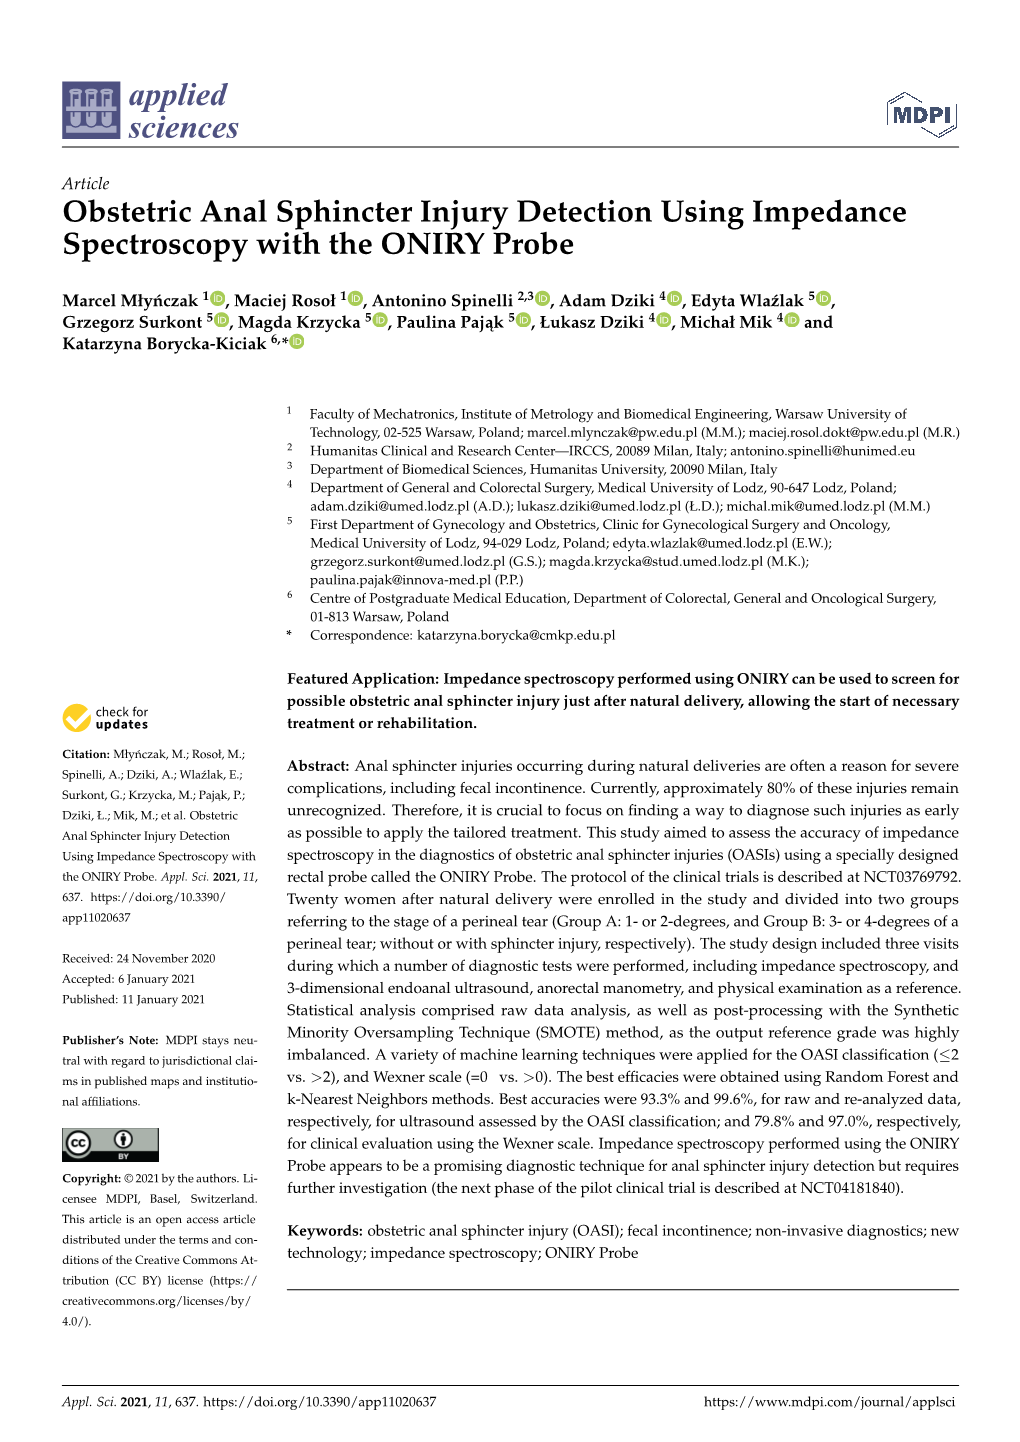 Obstetric Anal Sphincter Injury Detection Using Impedance Spectroscopy with the ONIRY Probe